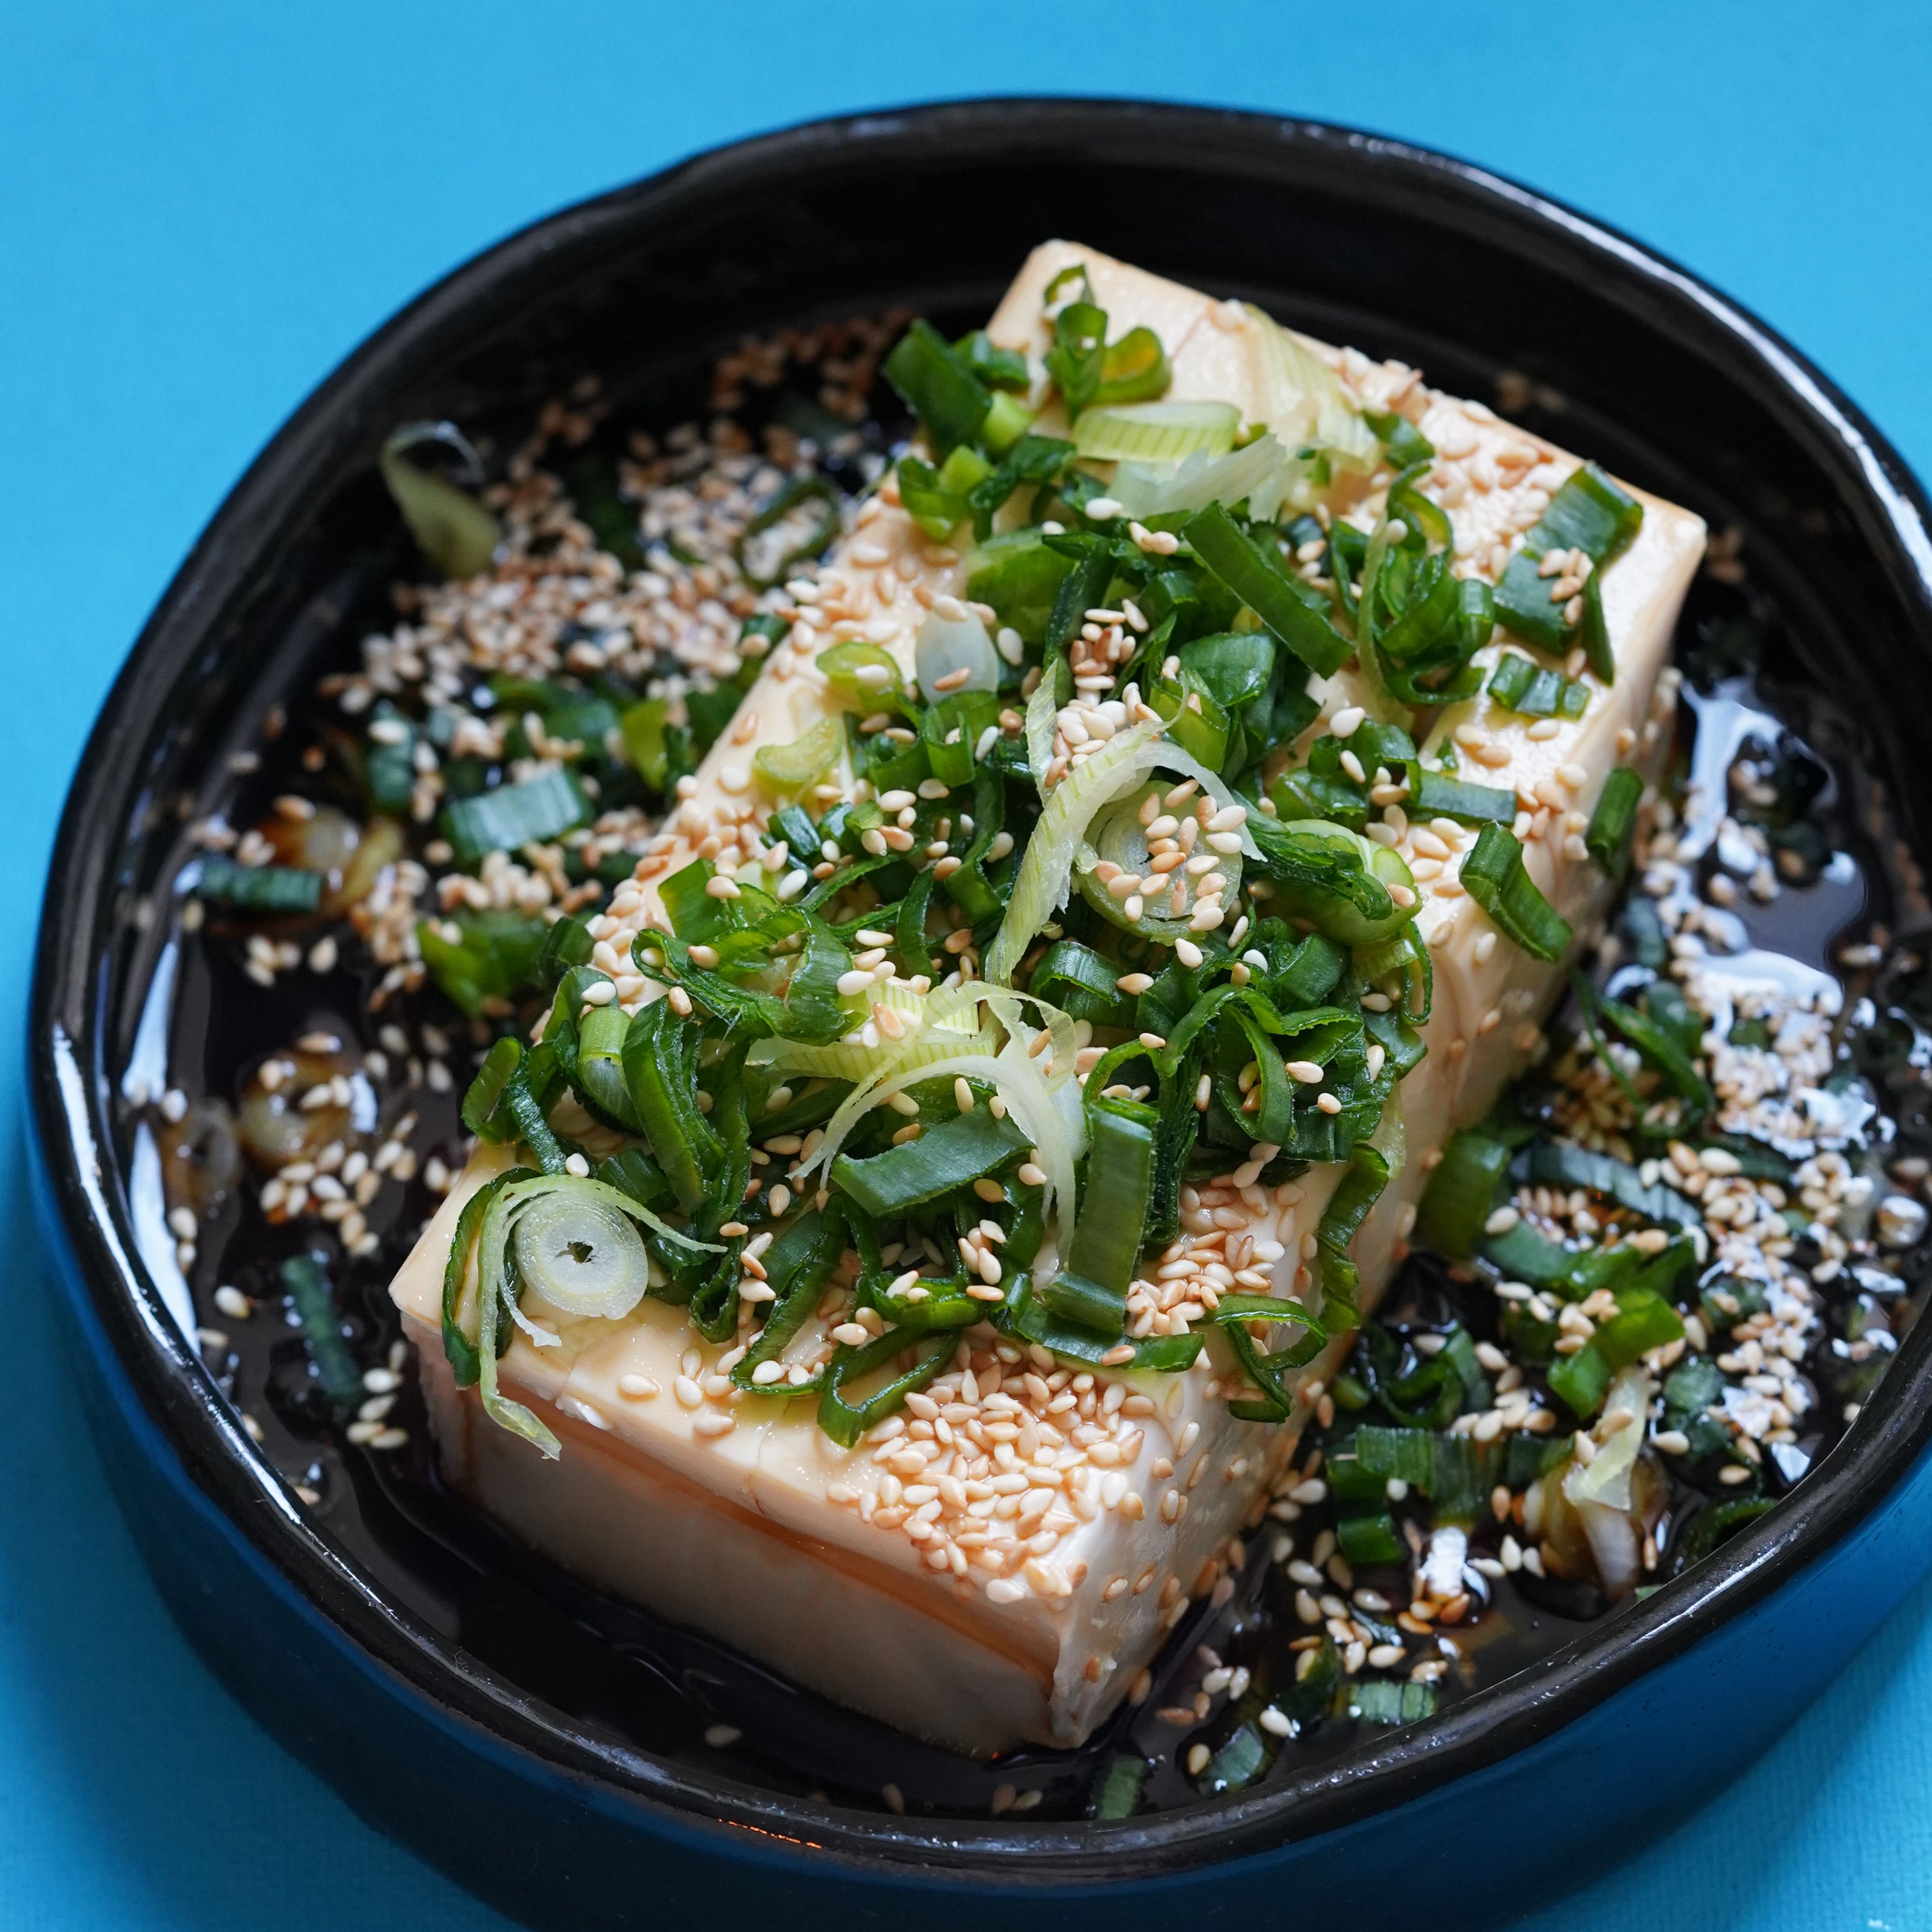 Pour the sauce over your tofu! Now lay the chives on top and sprinkle generously with sesame seeds.